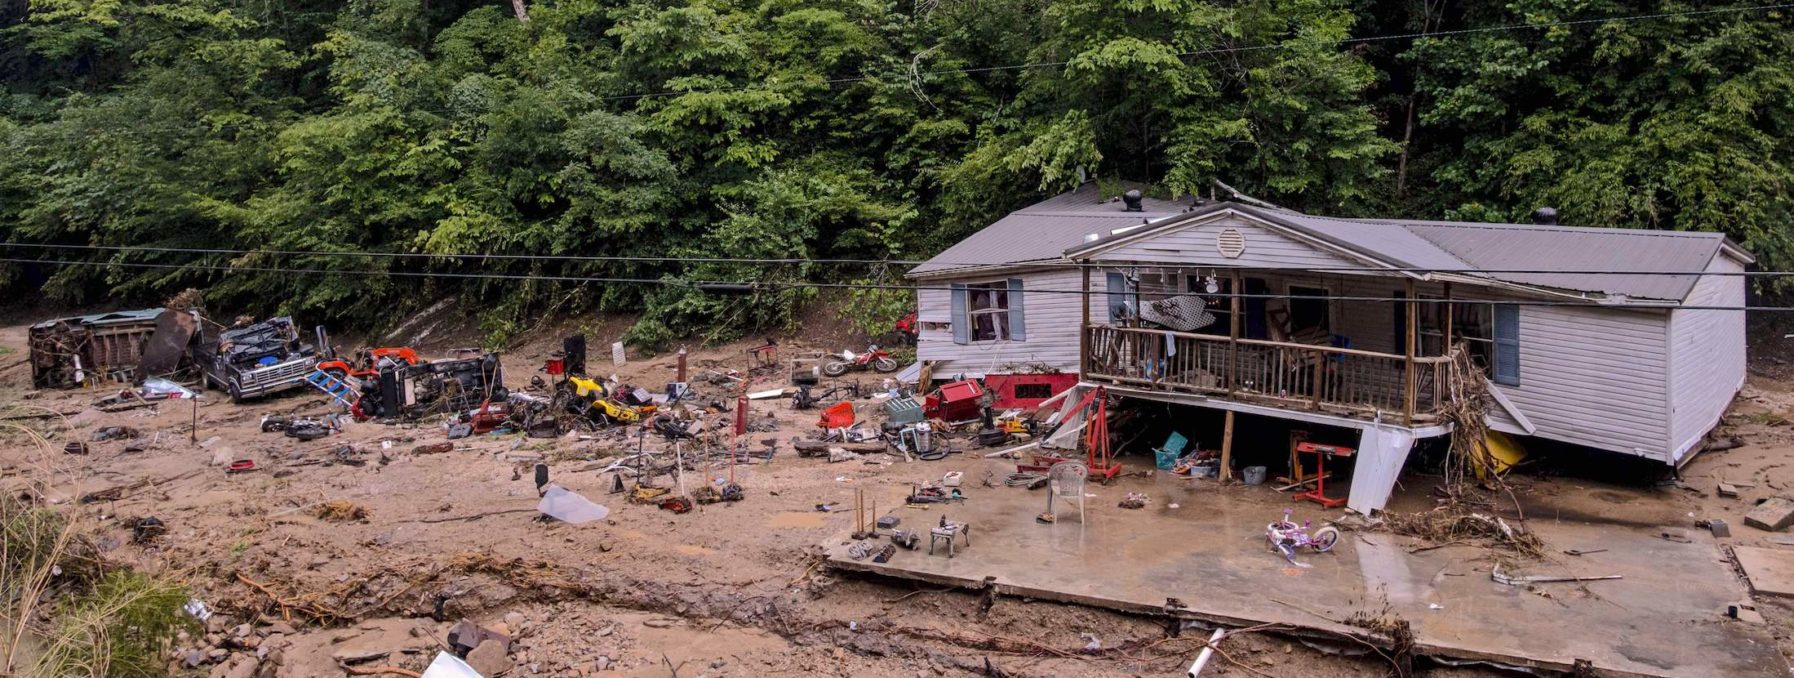 Distruction caused by flooding in Kentucky, image shows a home carried away from its foundation.